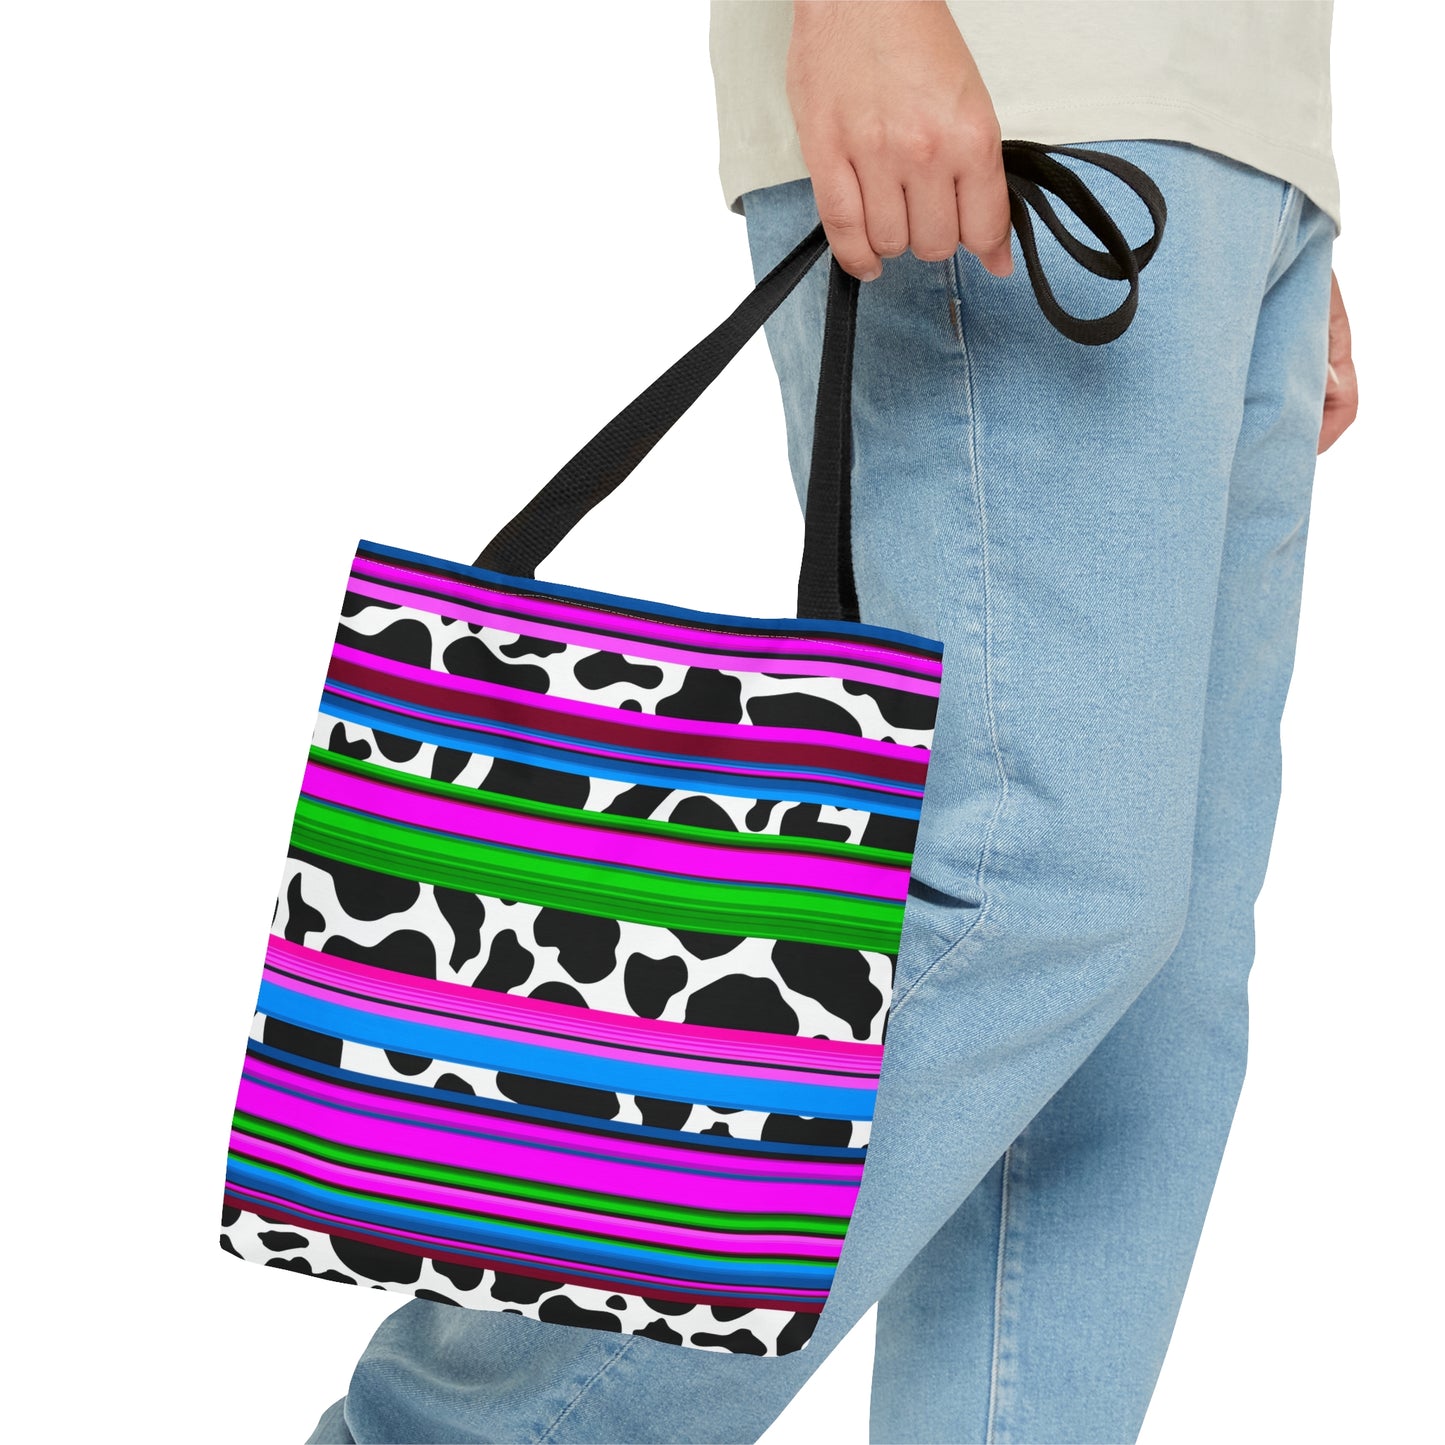 Colorful Cow and Serape Print Tote Bag, Tote Bag, Book Bag, Grocery Bag, Shoulder Bag, Gifts For Her, Gifts For Teacher, Mom Gifts, Tote